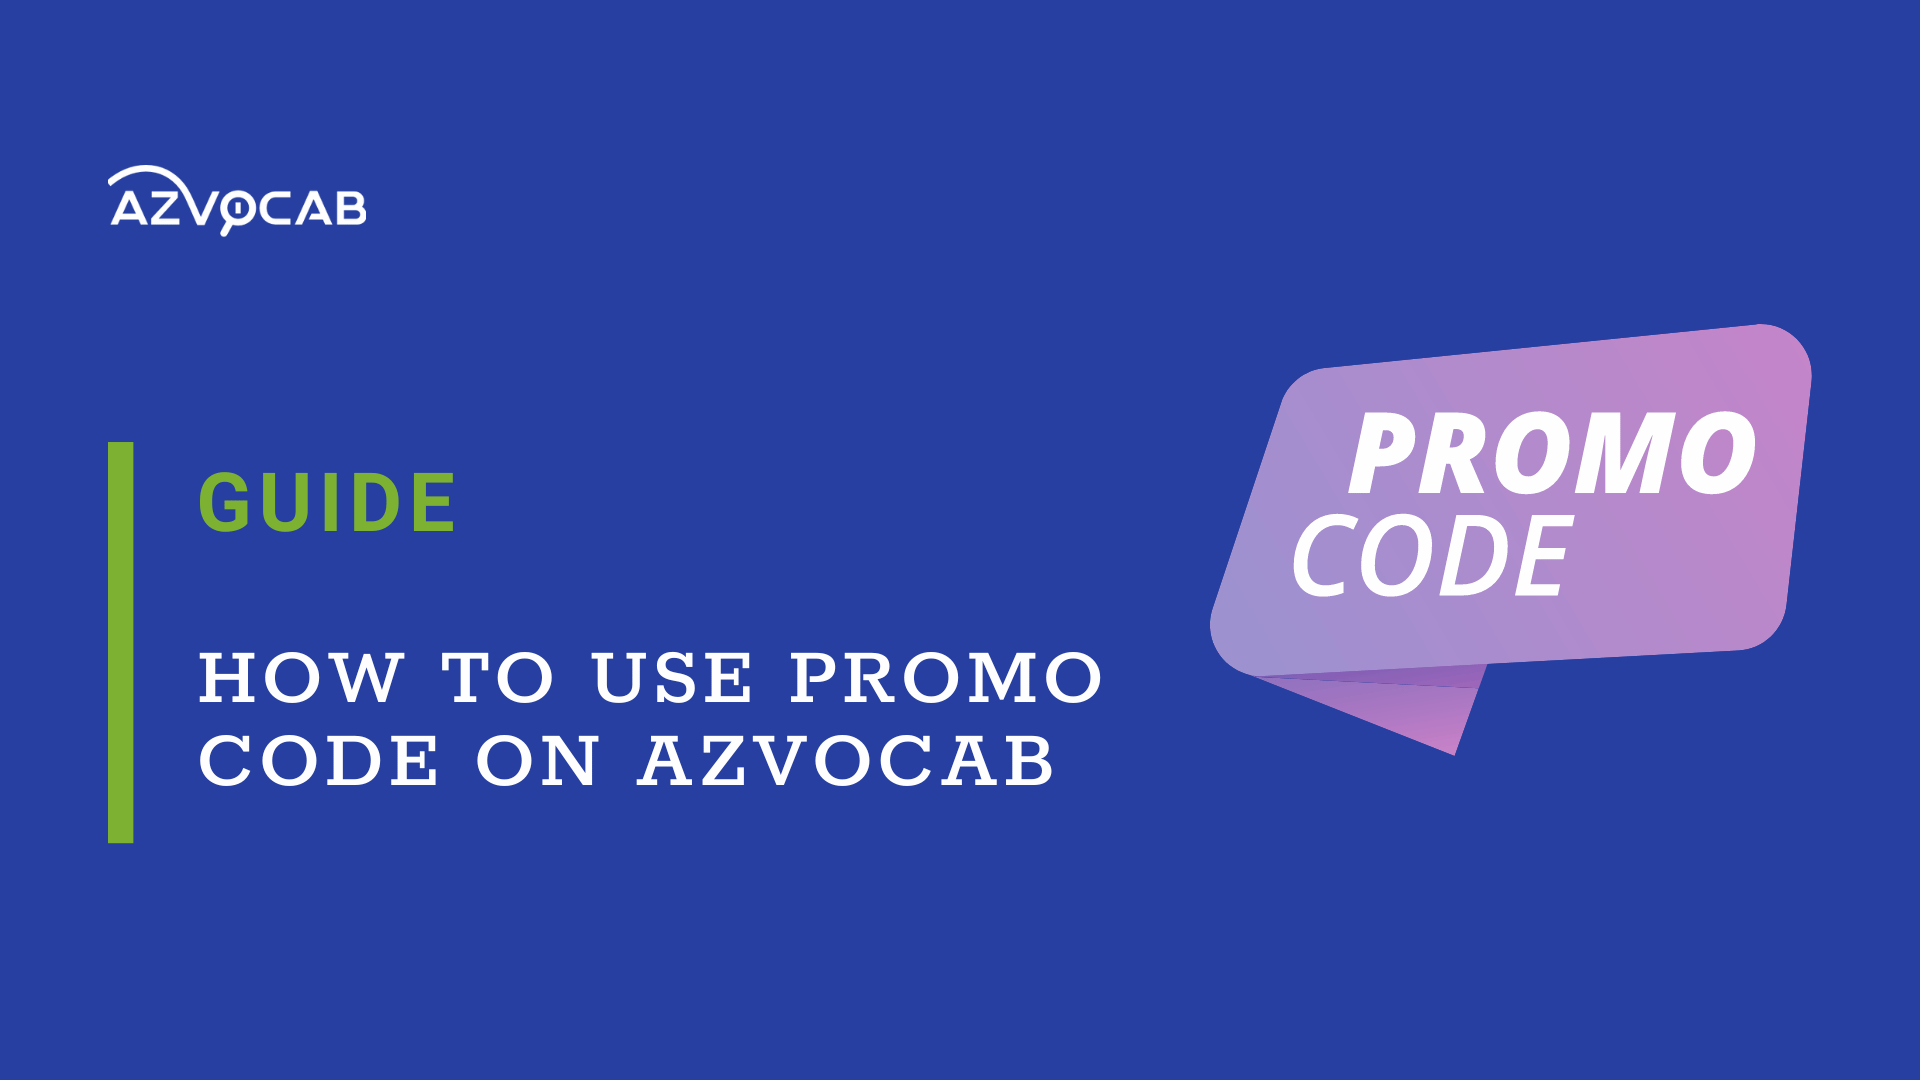 How to use promo code on azVocab